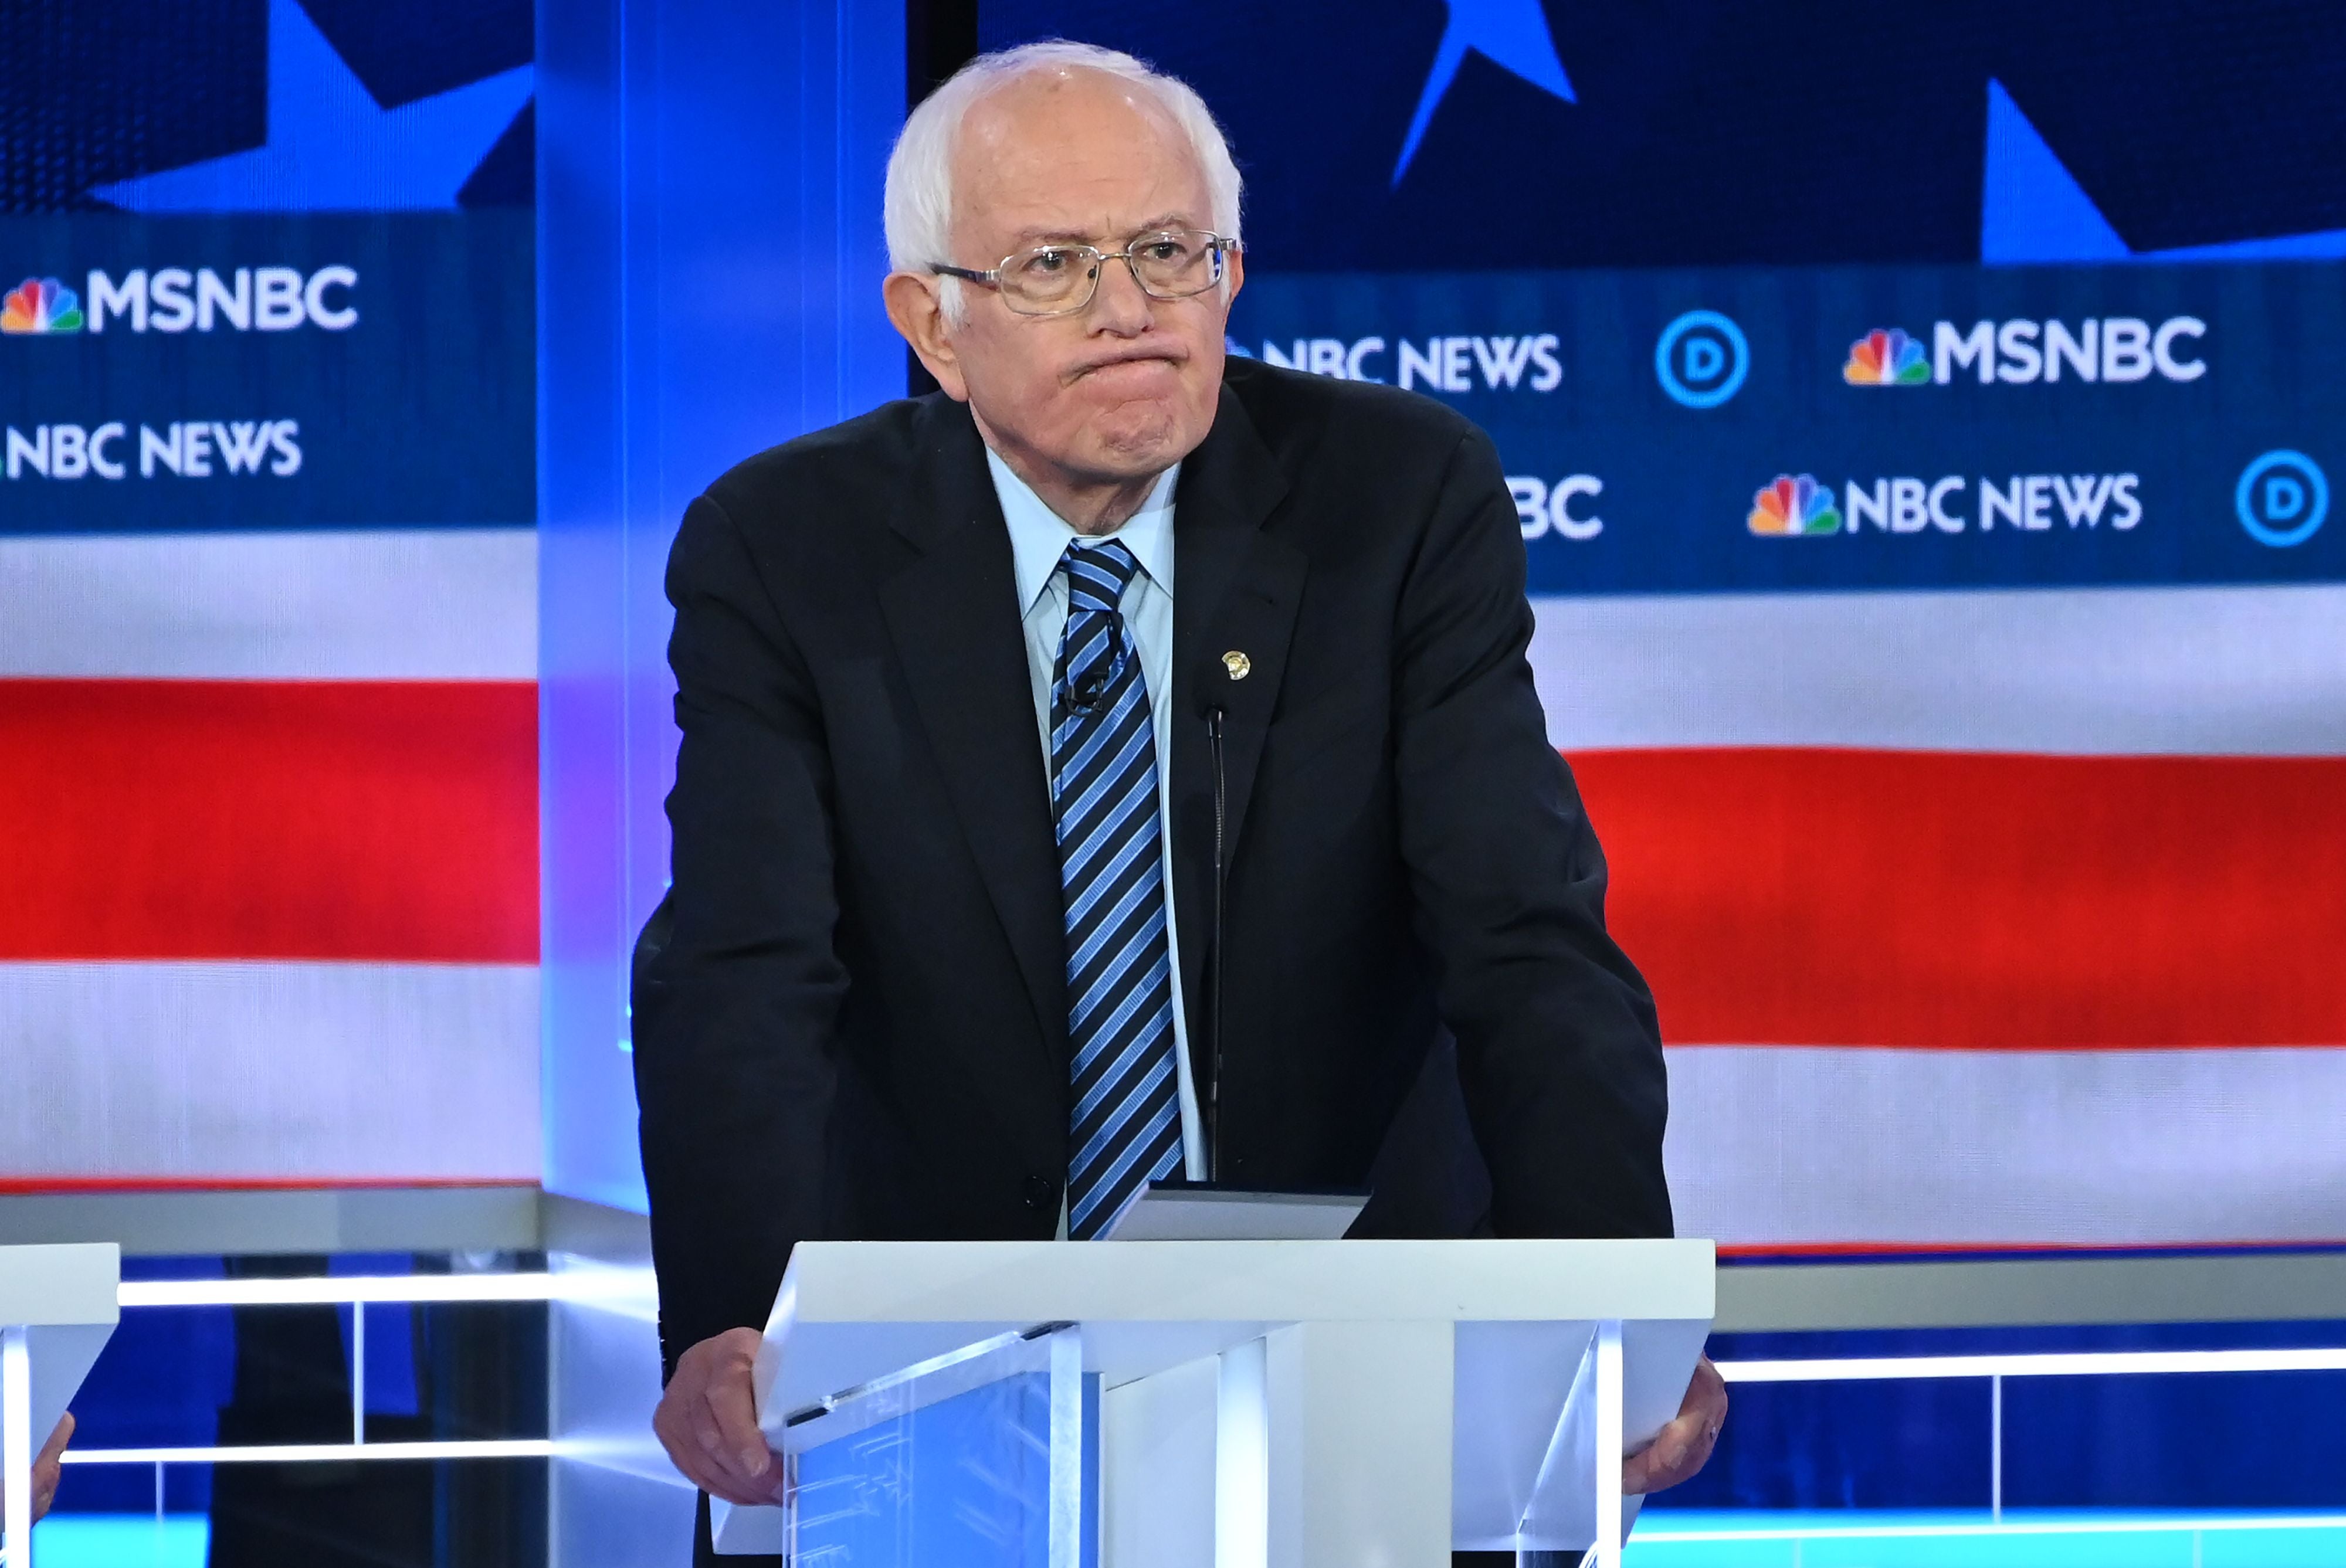 Bernie Sanders Leads New National Poll By Double Digits